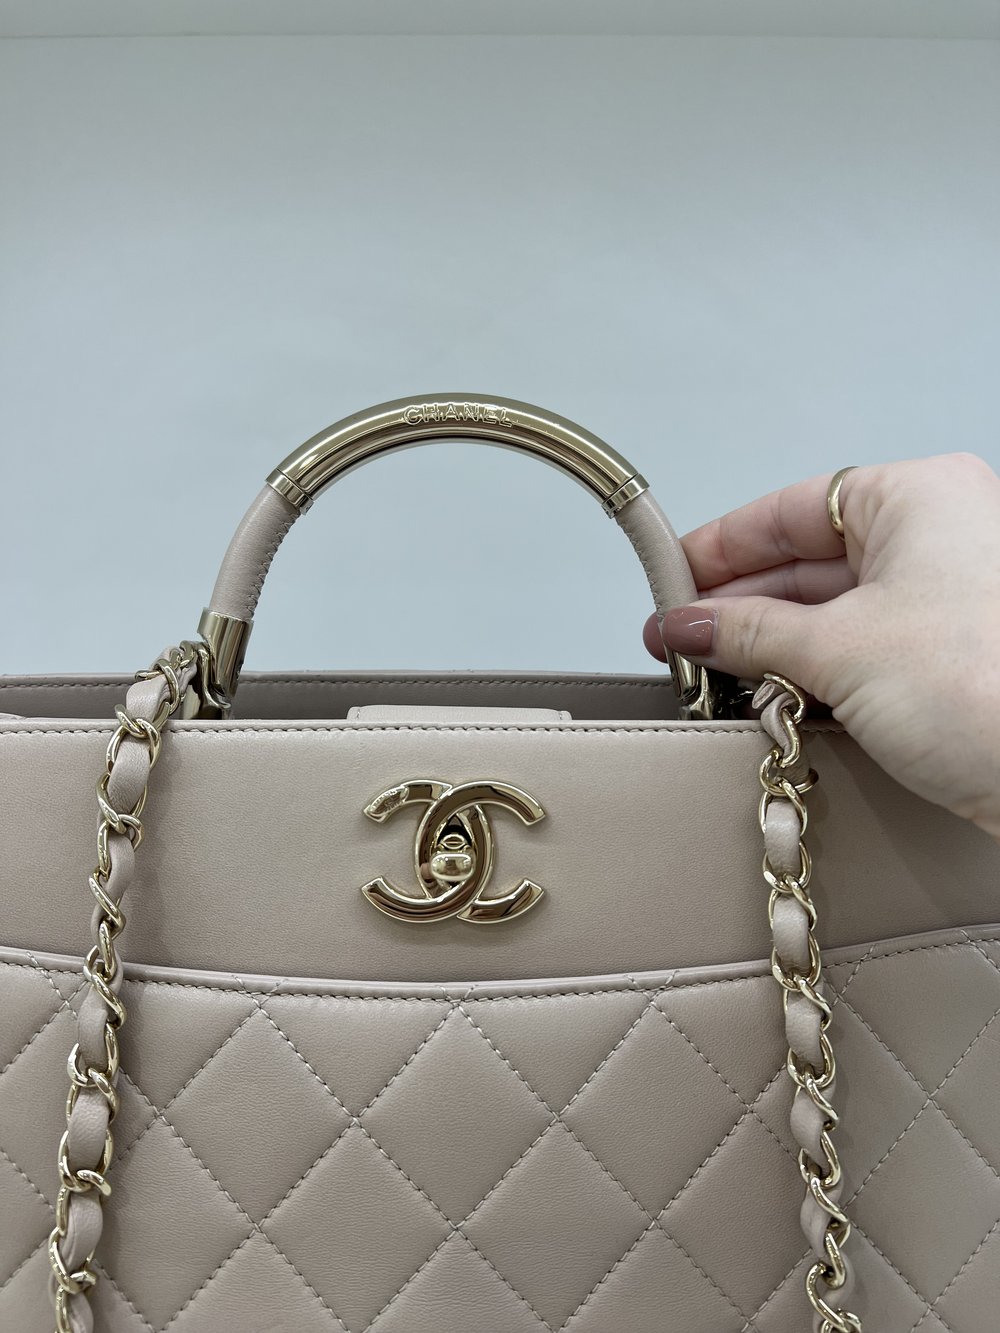 Chanel Large Carry Chic Shopper - Nude - SOLD